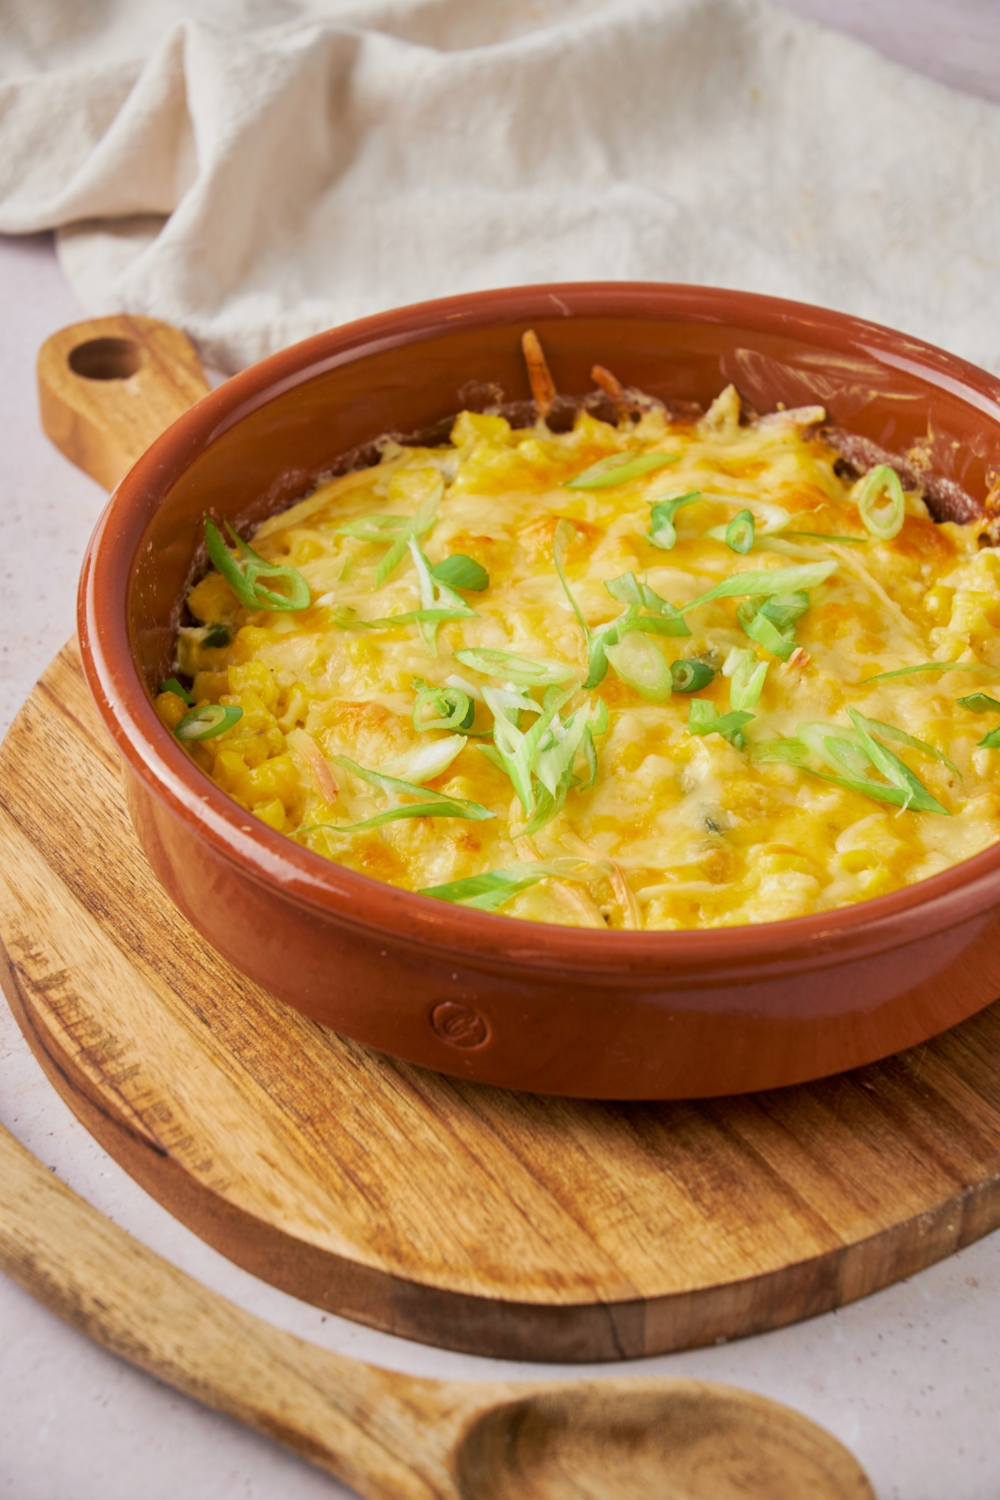 A red dish of cooked jalapeno corn casserole on a wooden serving platter